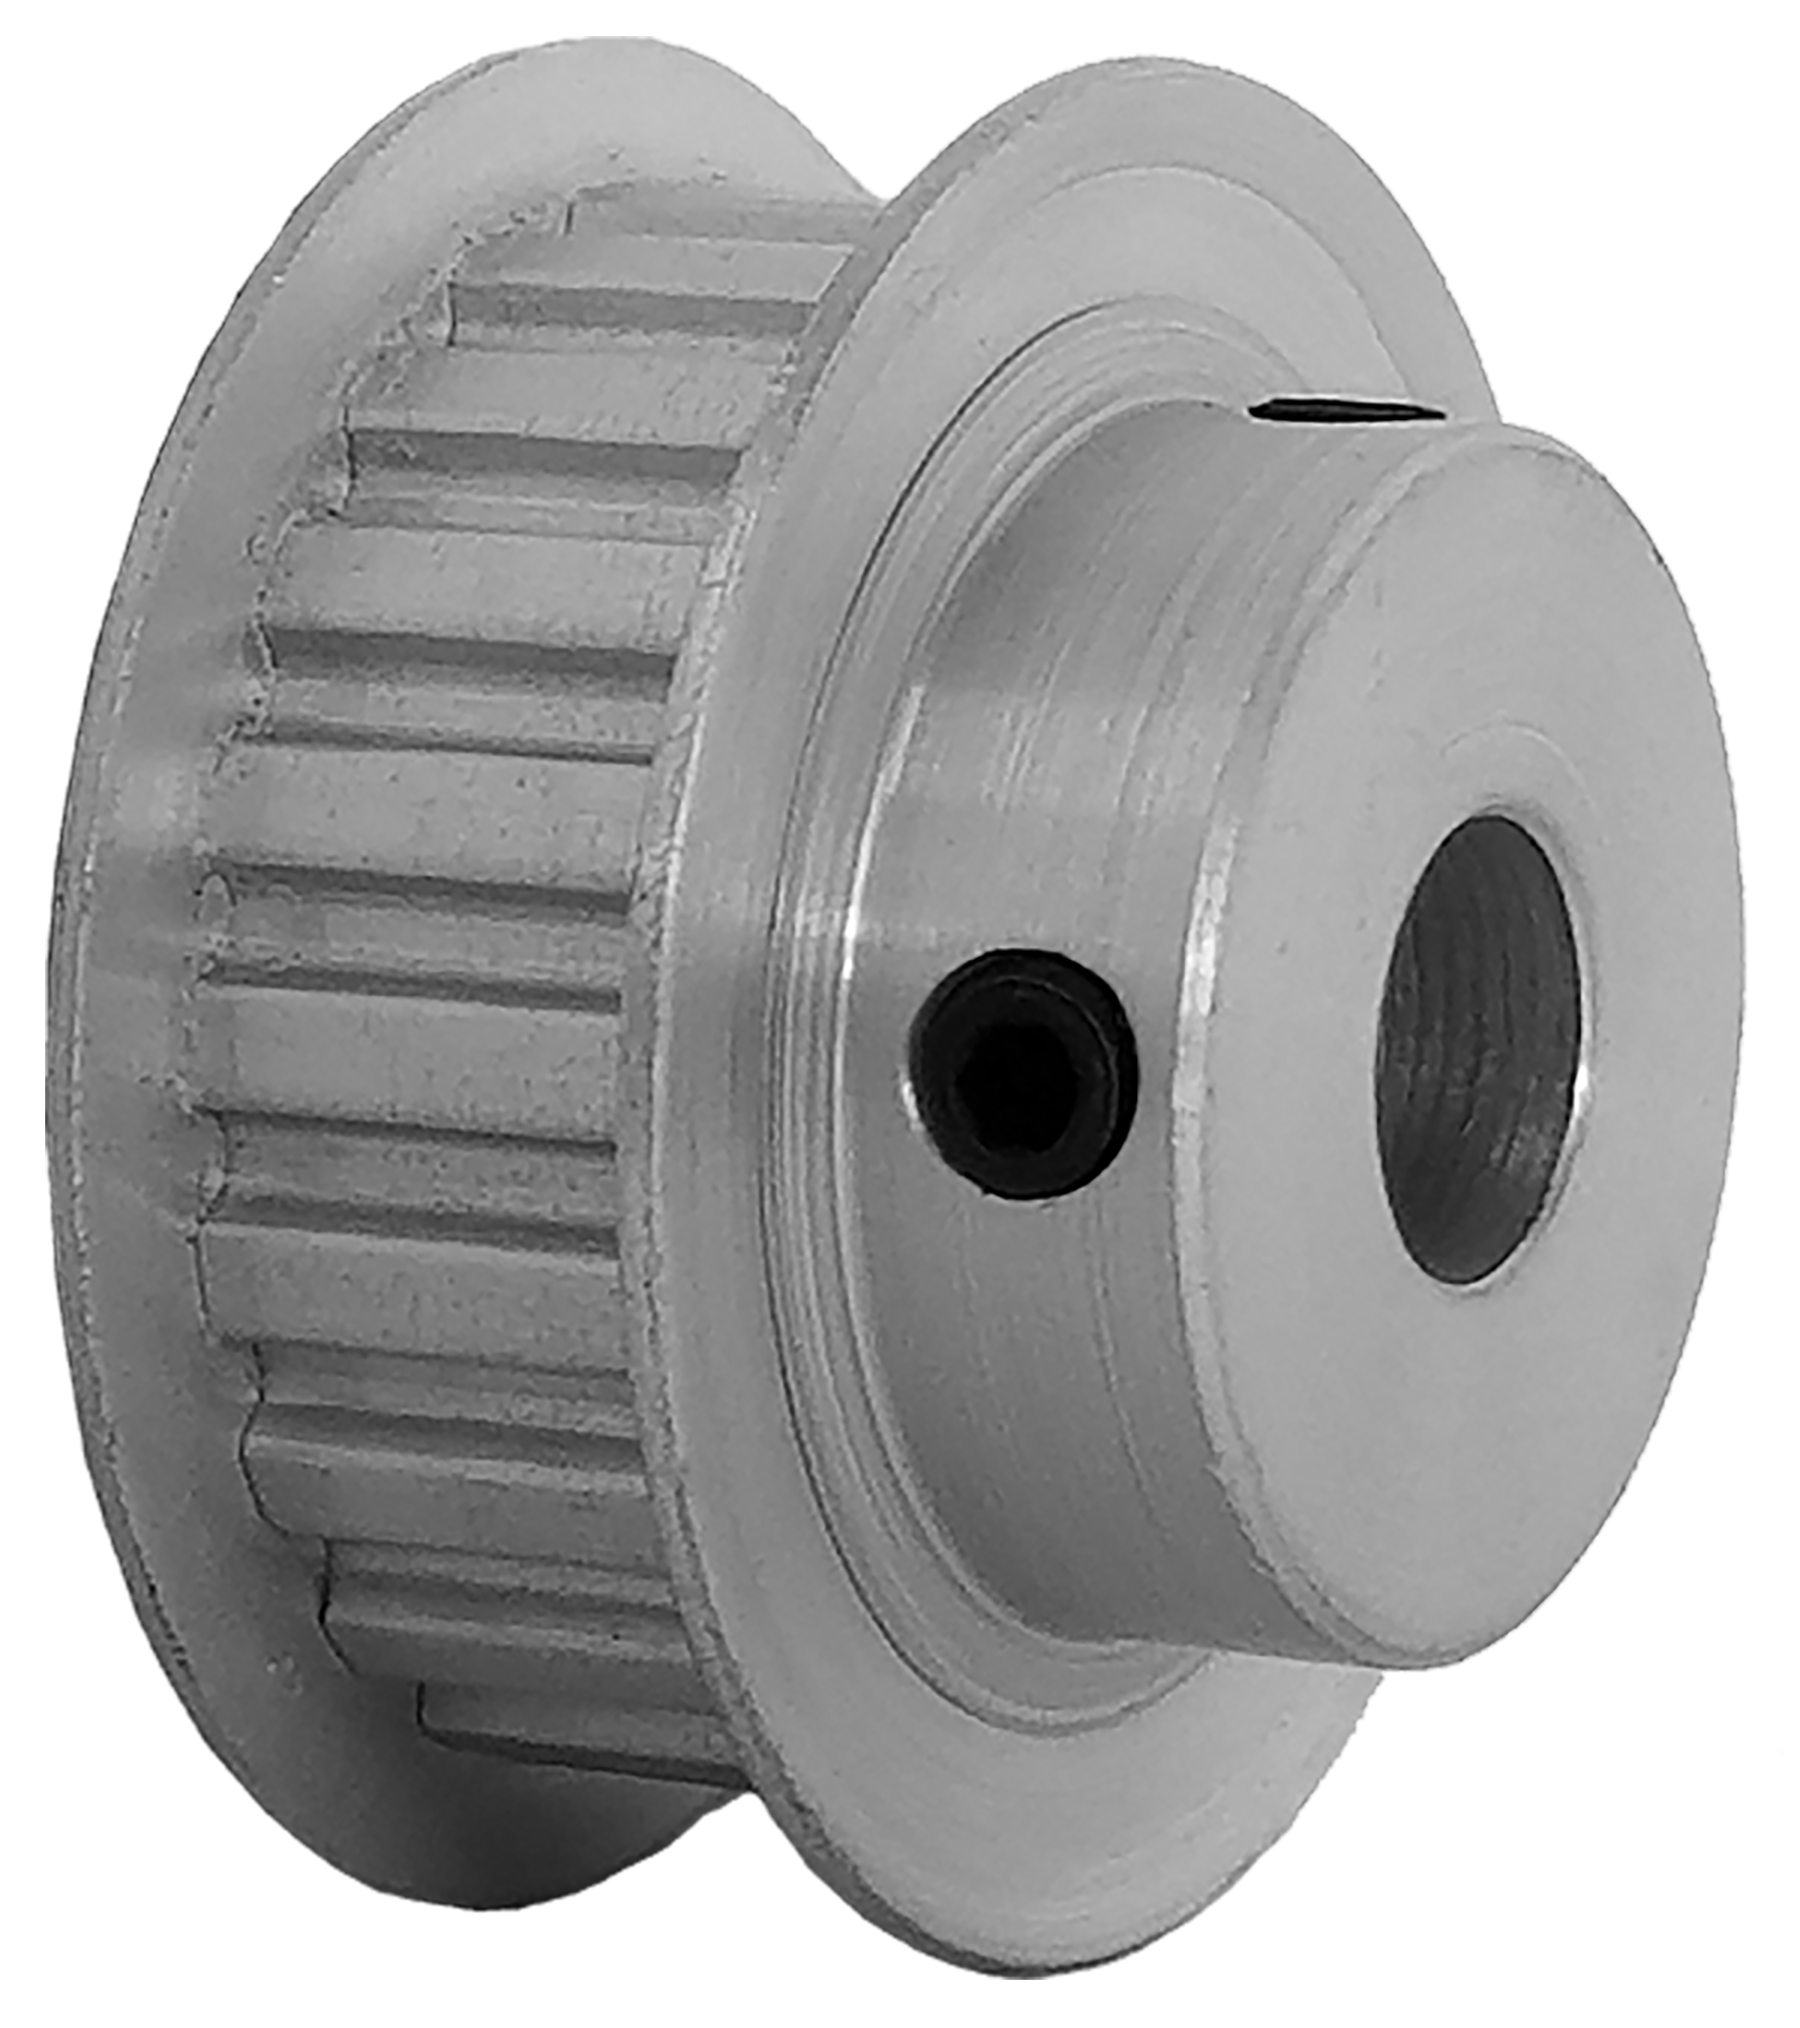 21XL037-6FA5 - Aluminum Imperial Pitch Pulleys